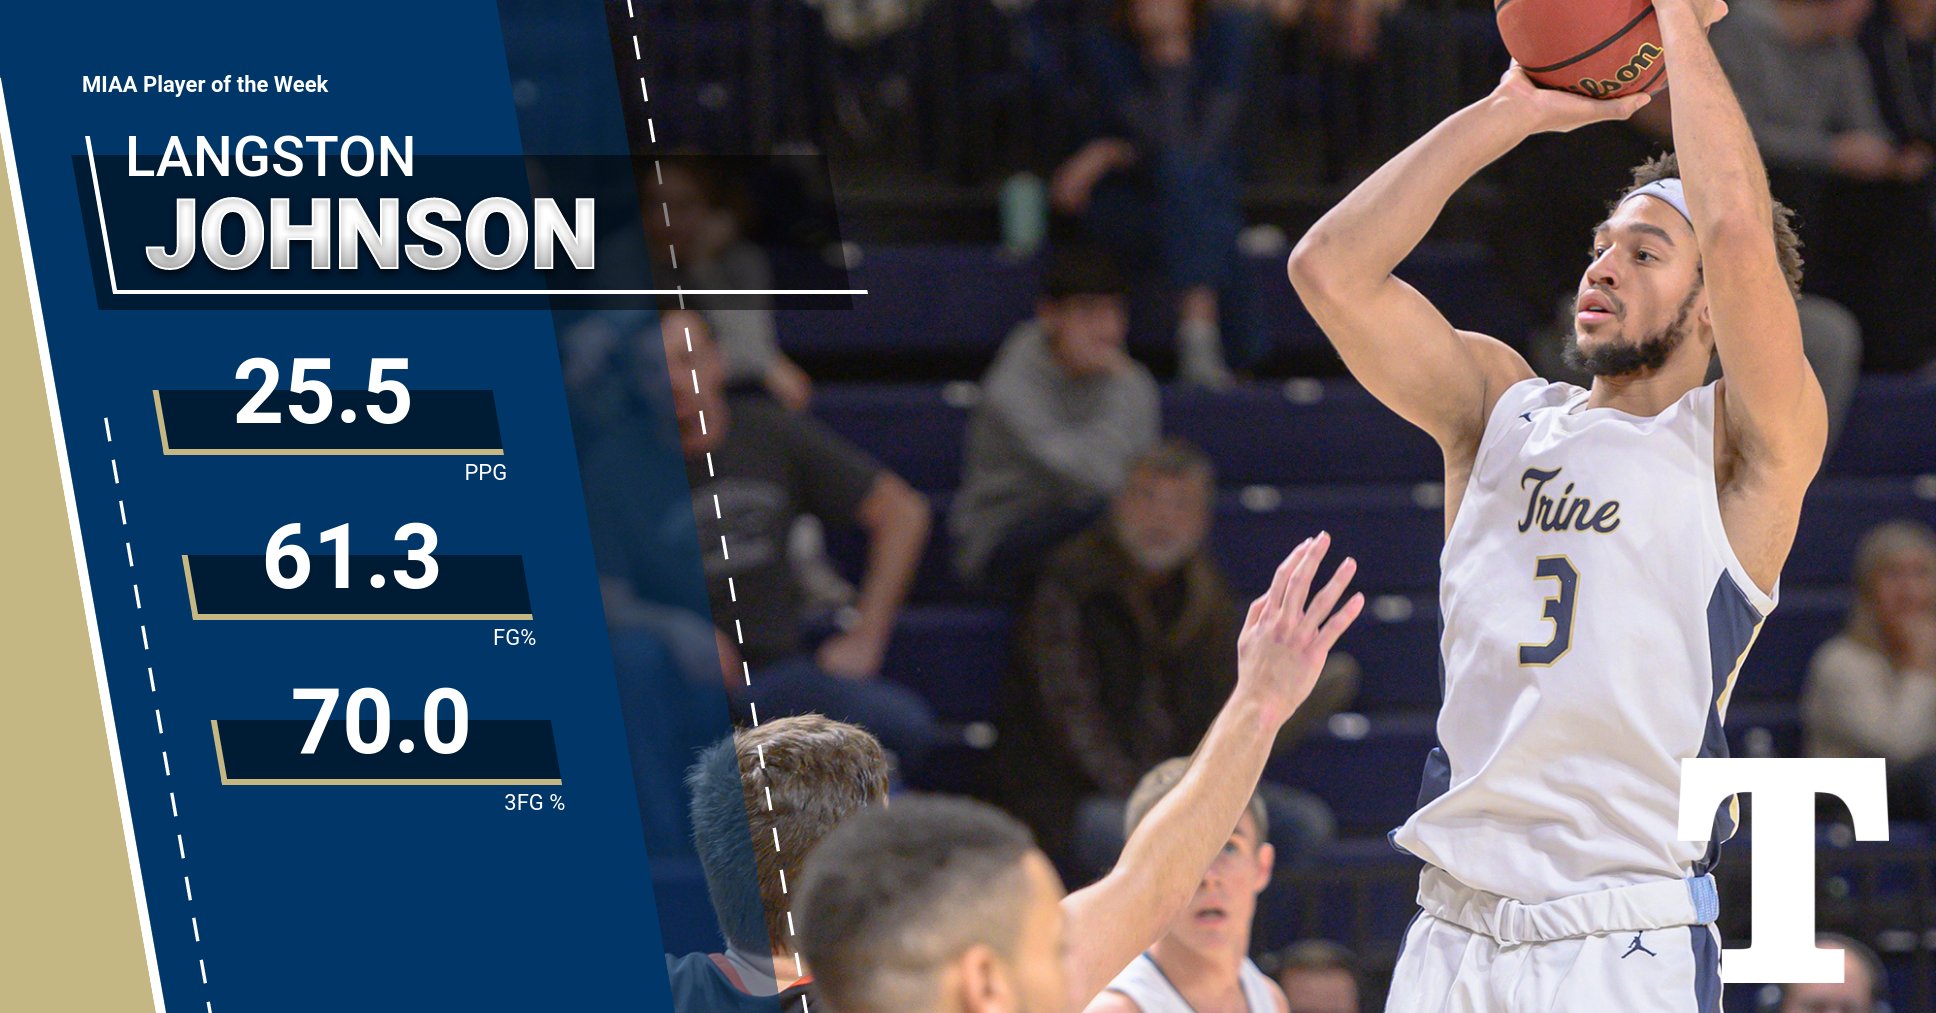 Langston Johnson Named MIAA Player of the Week